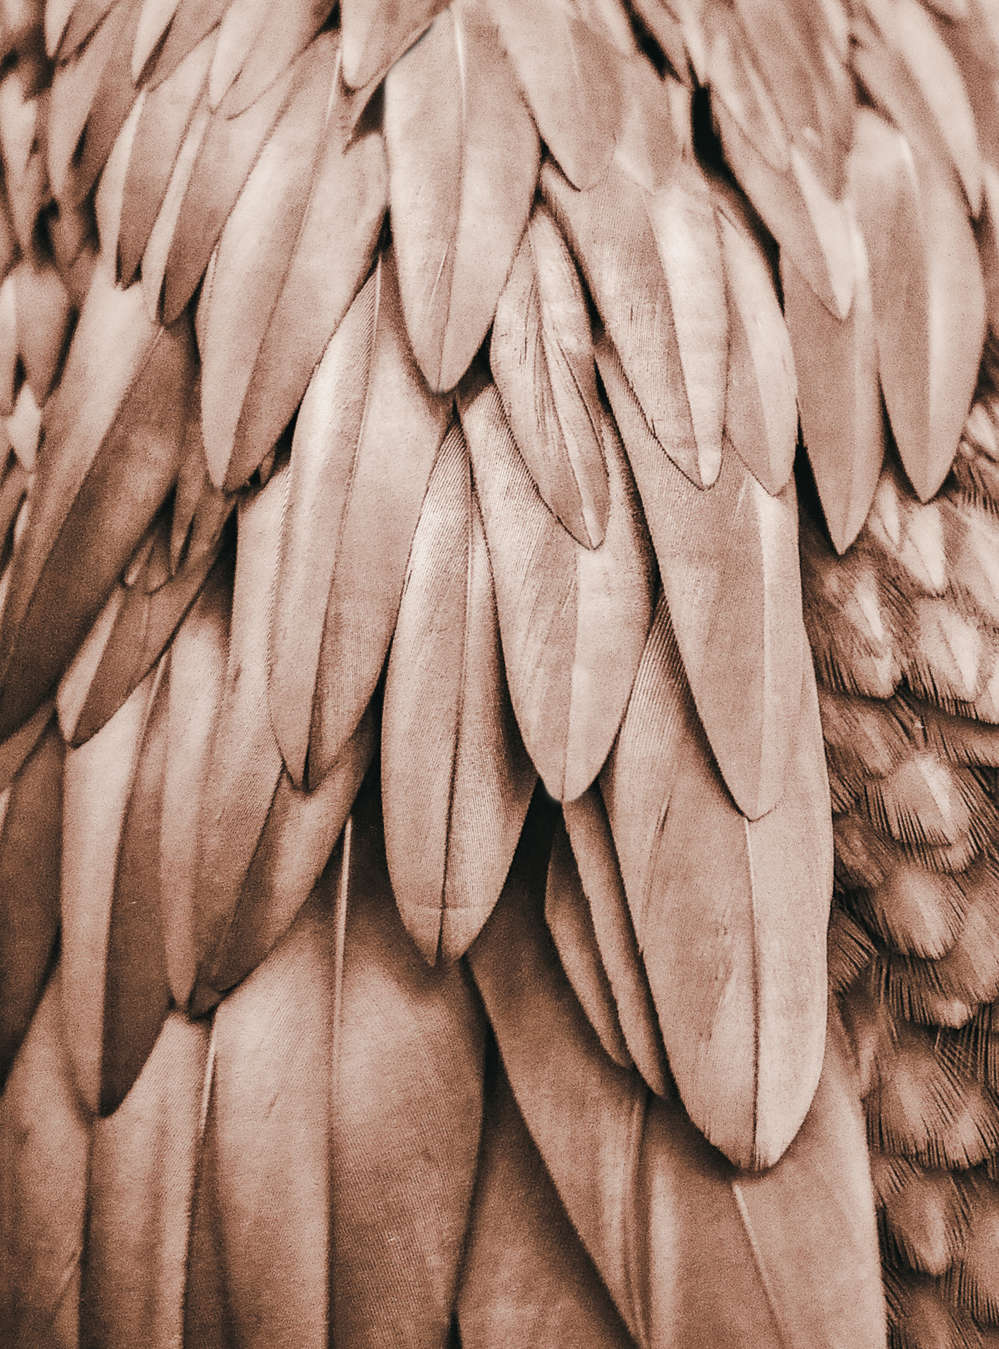             Feather Wings Behang in Sepia Brown
        